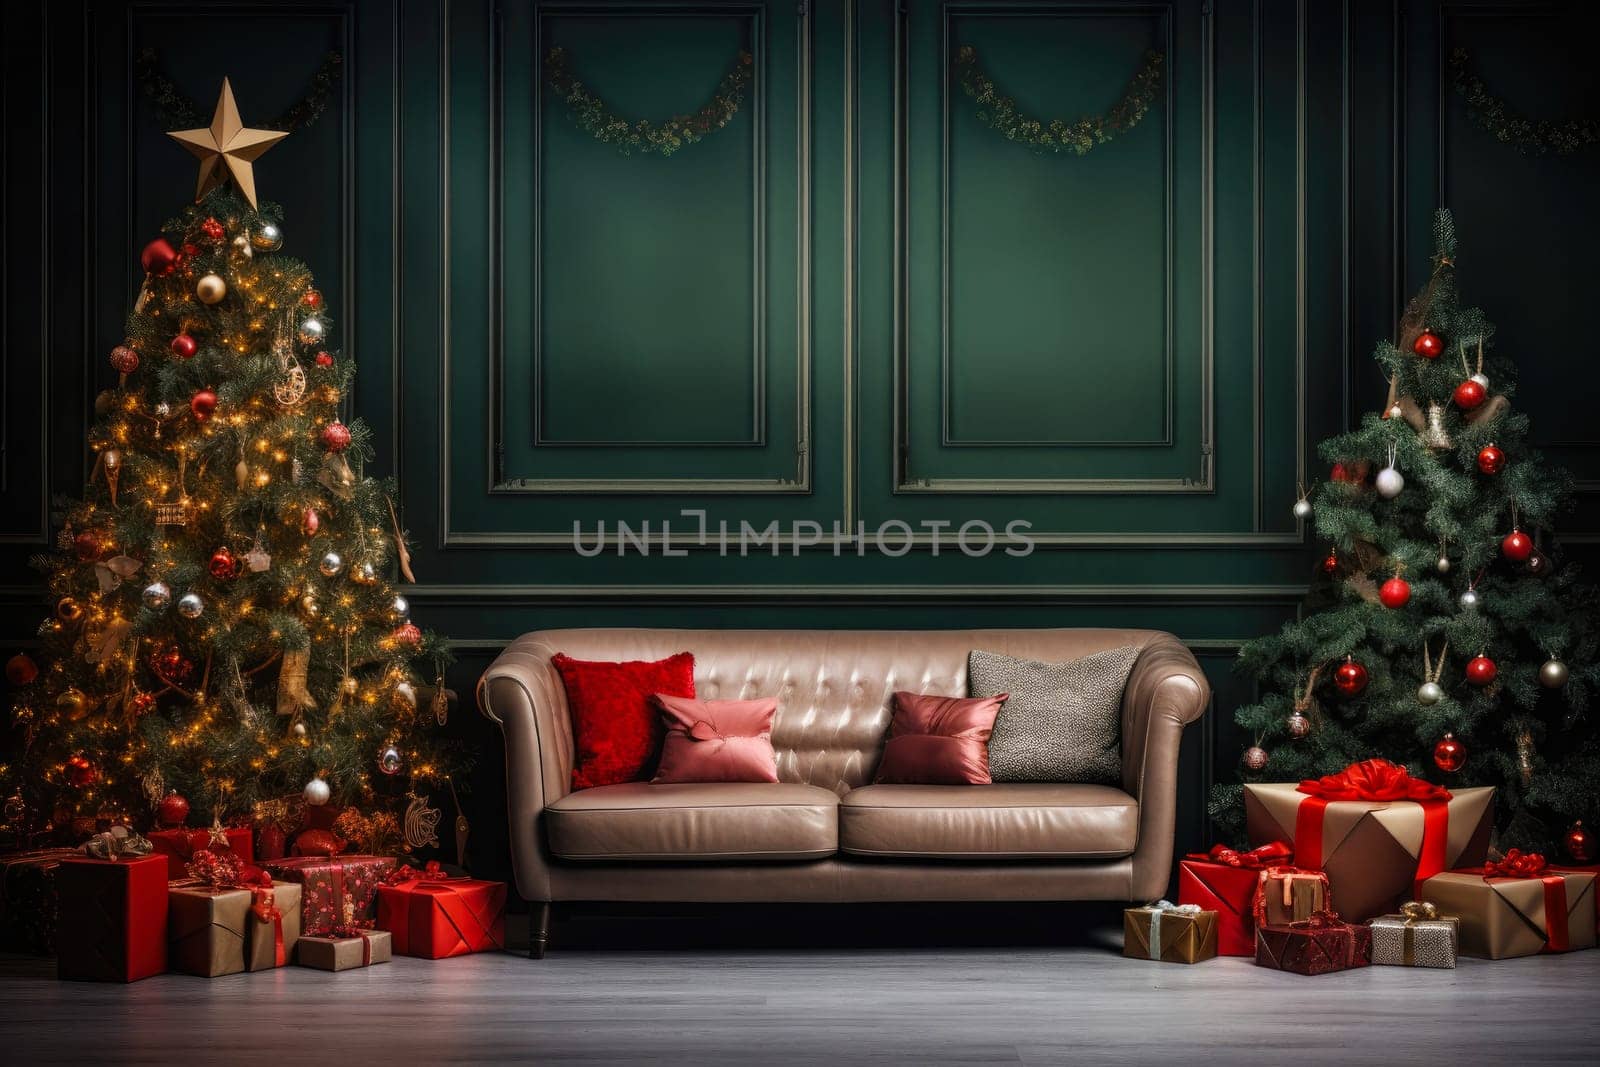 Christmas background with Christmas tree, gifts and sofa against a wall by andreyz